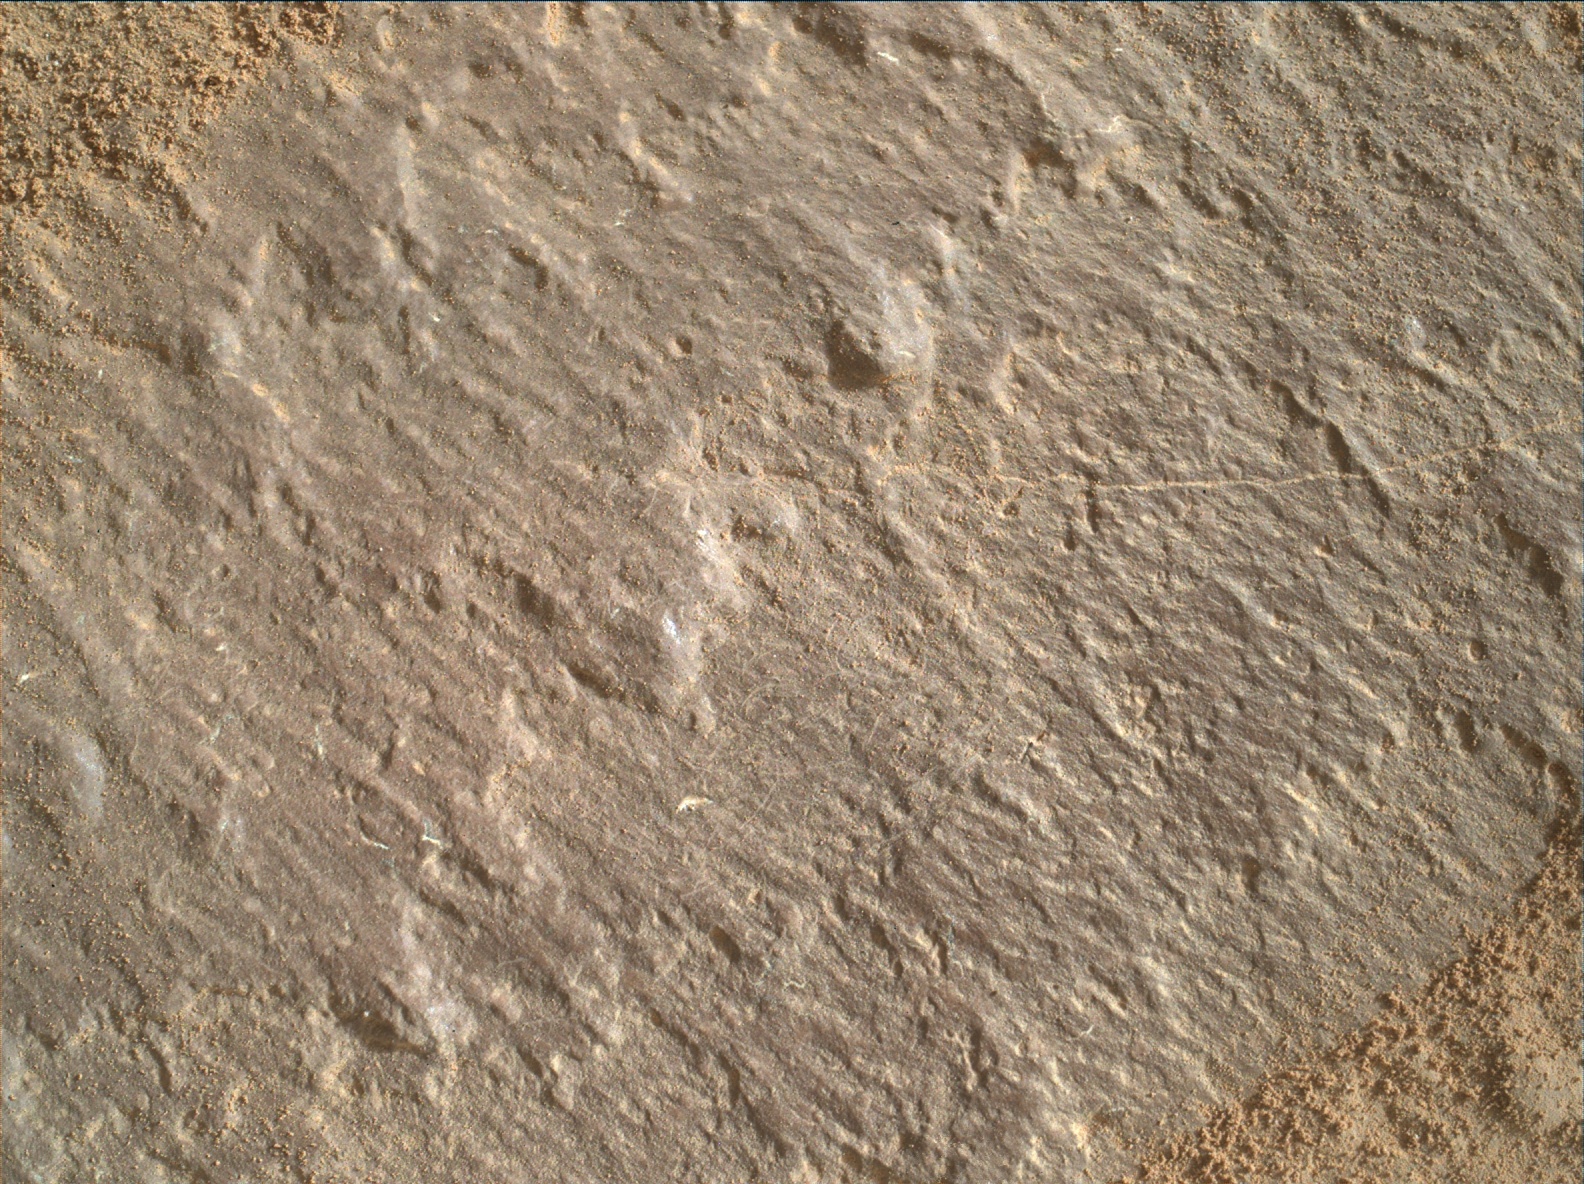 Nasa's Mars rover Curiosity acquired this image using its Mars Hand Lens Imager (MAHLI) on Sol 1418